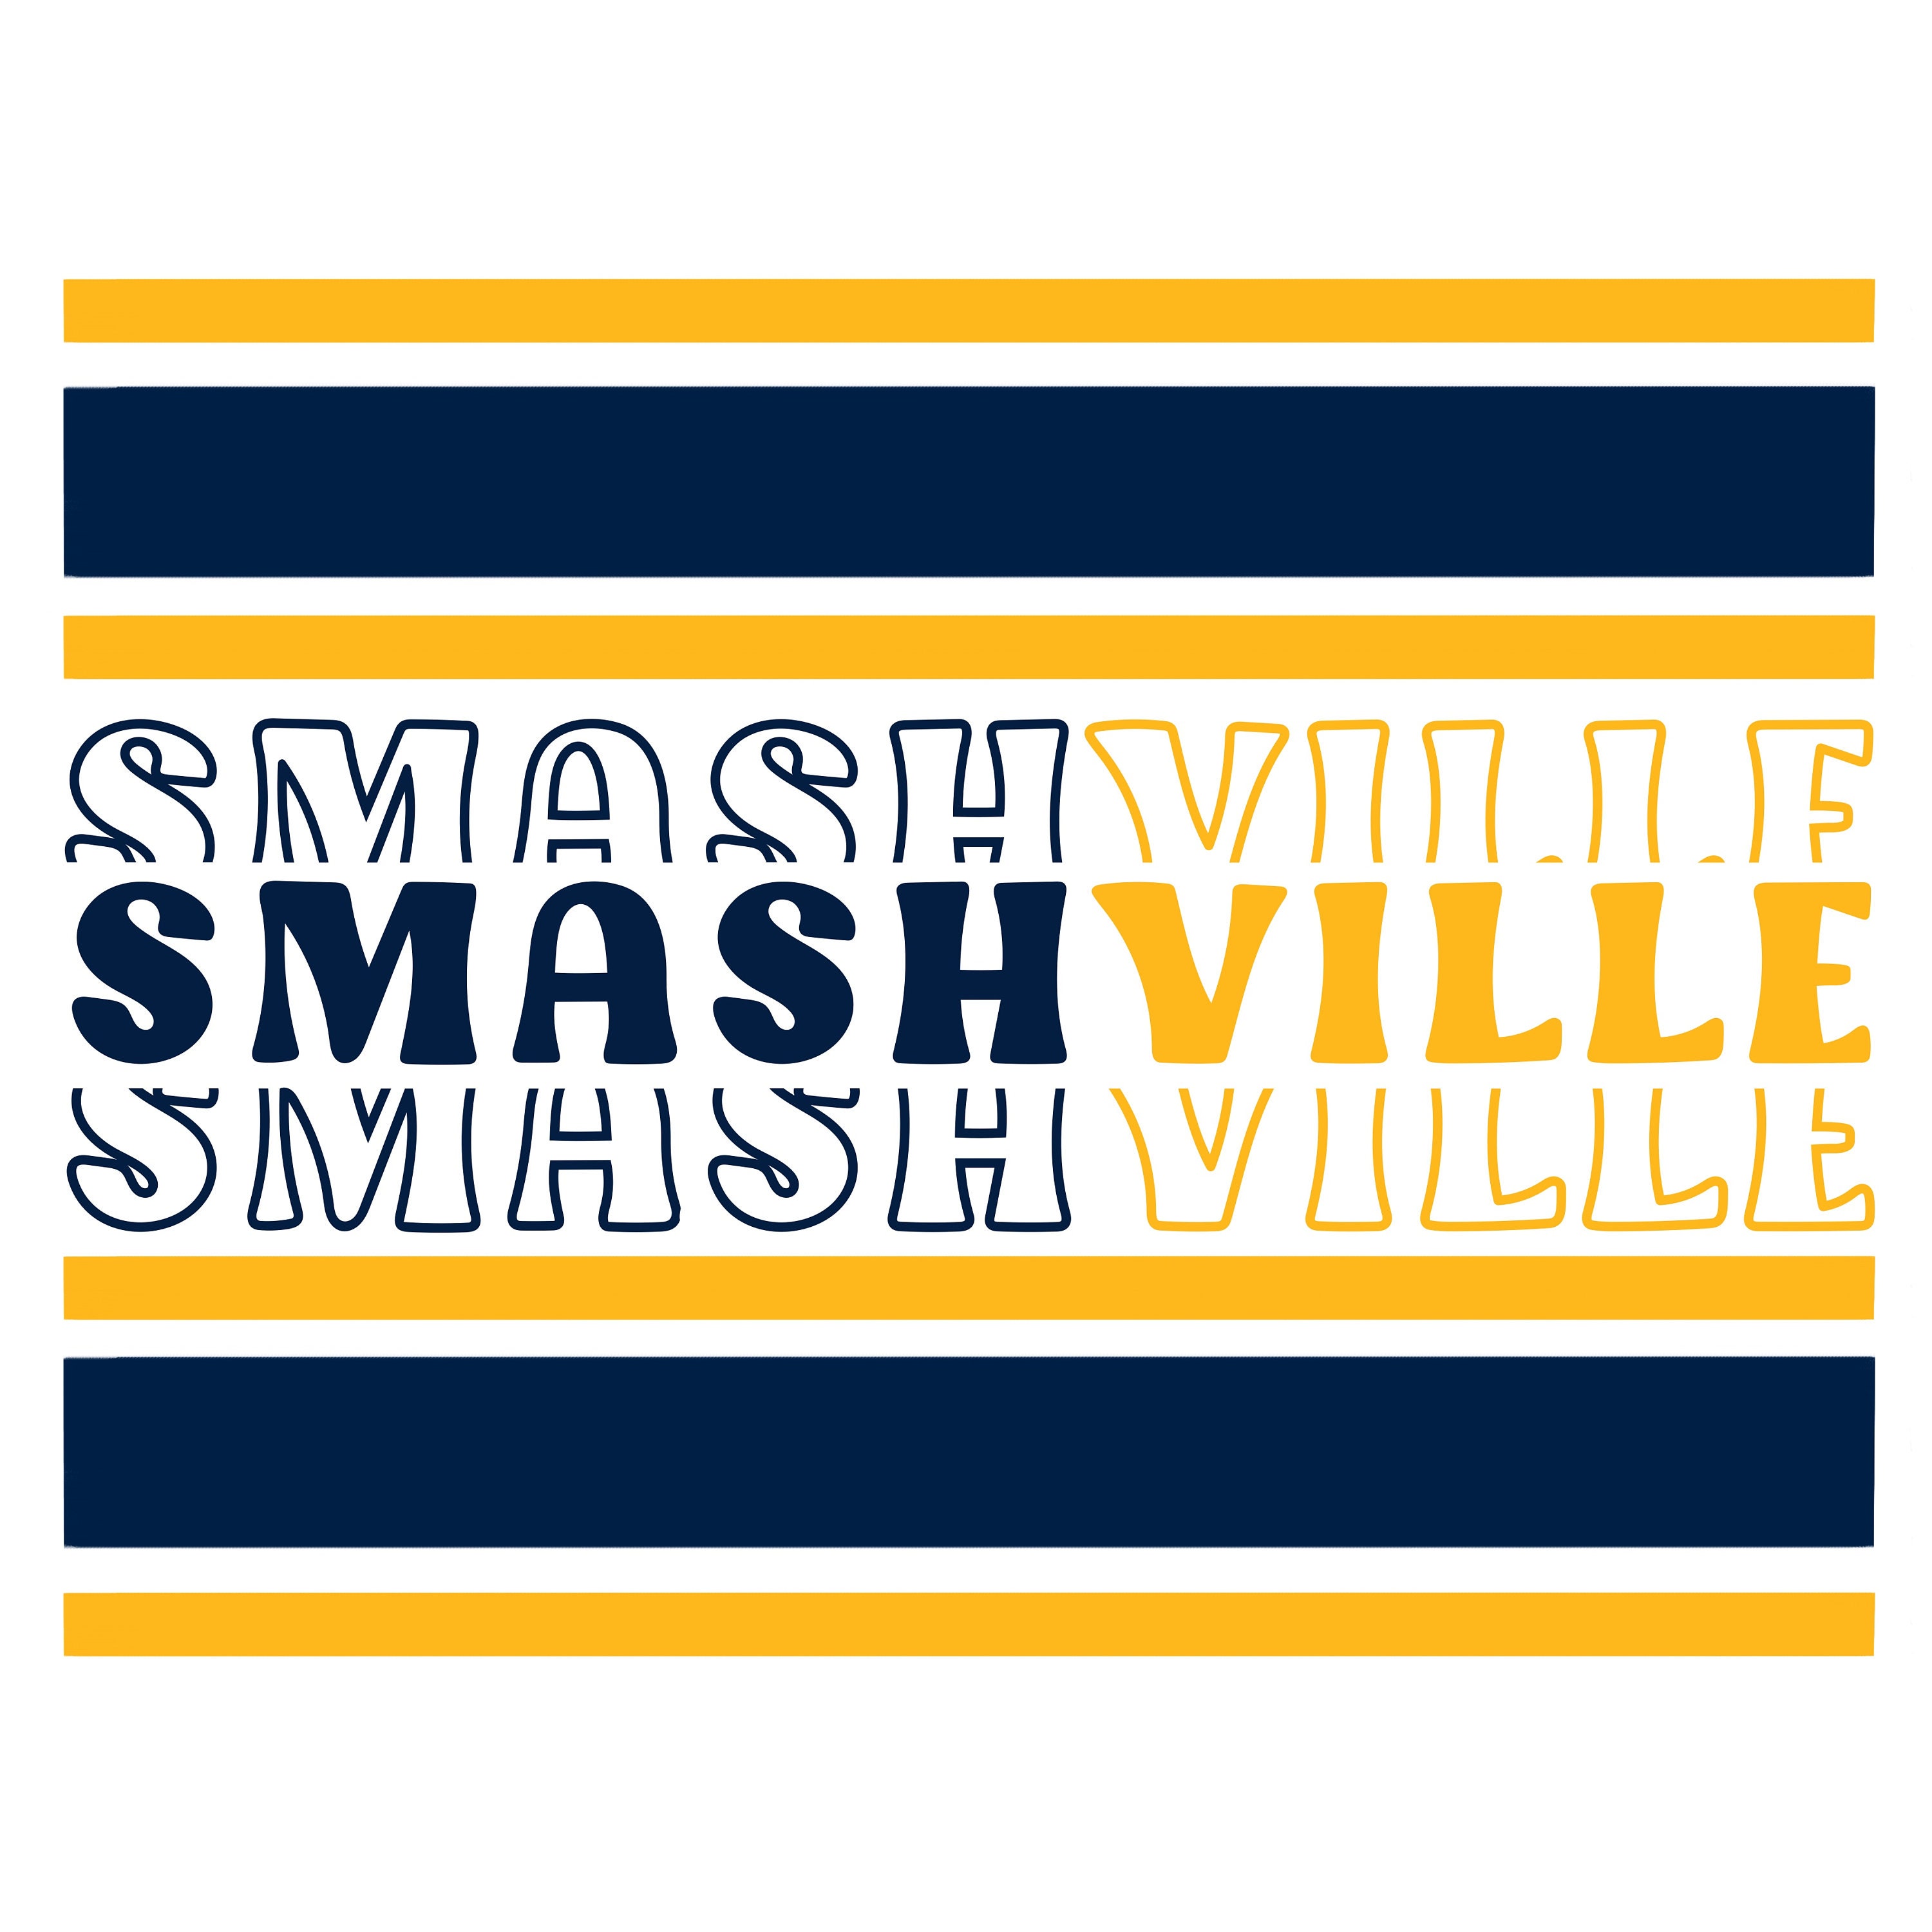 New welcome to Smashville T-shirt Available in 3 